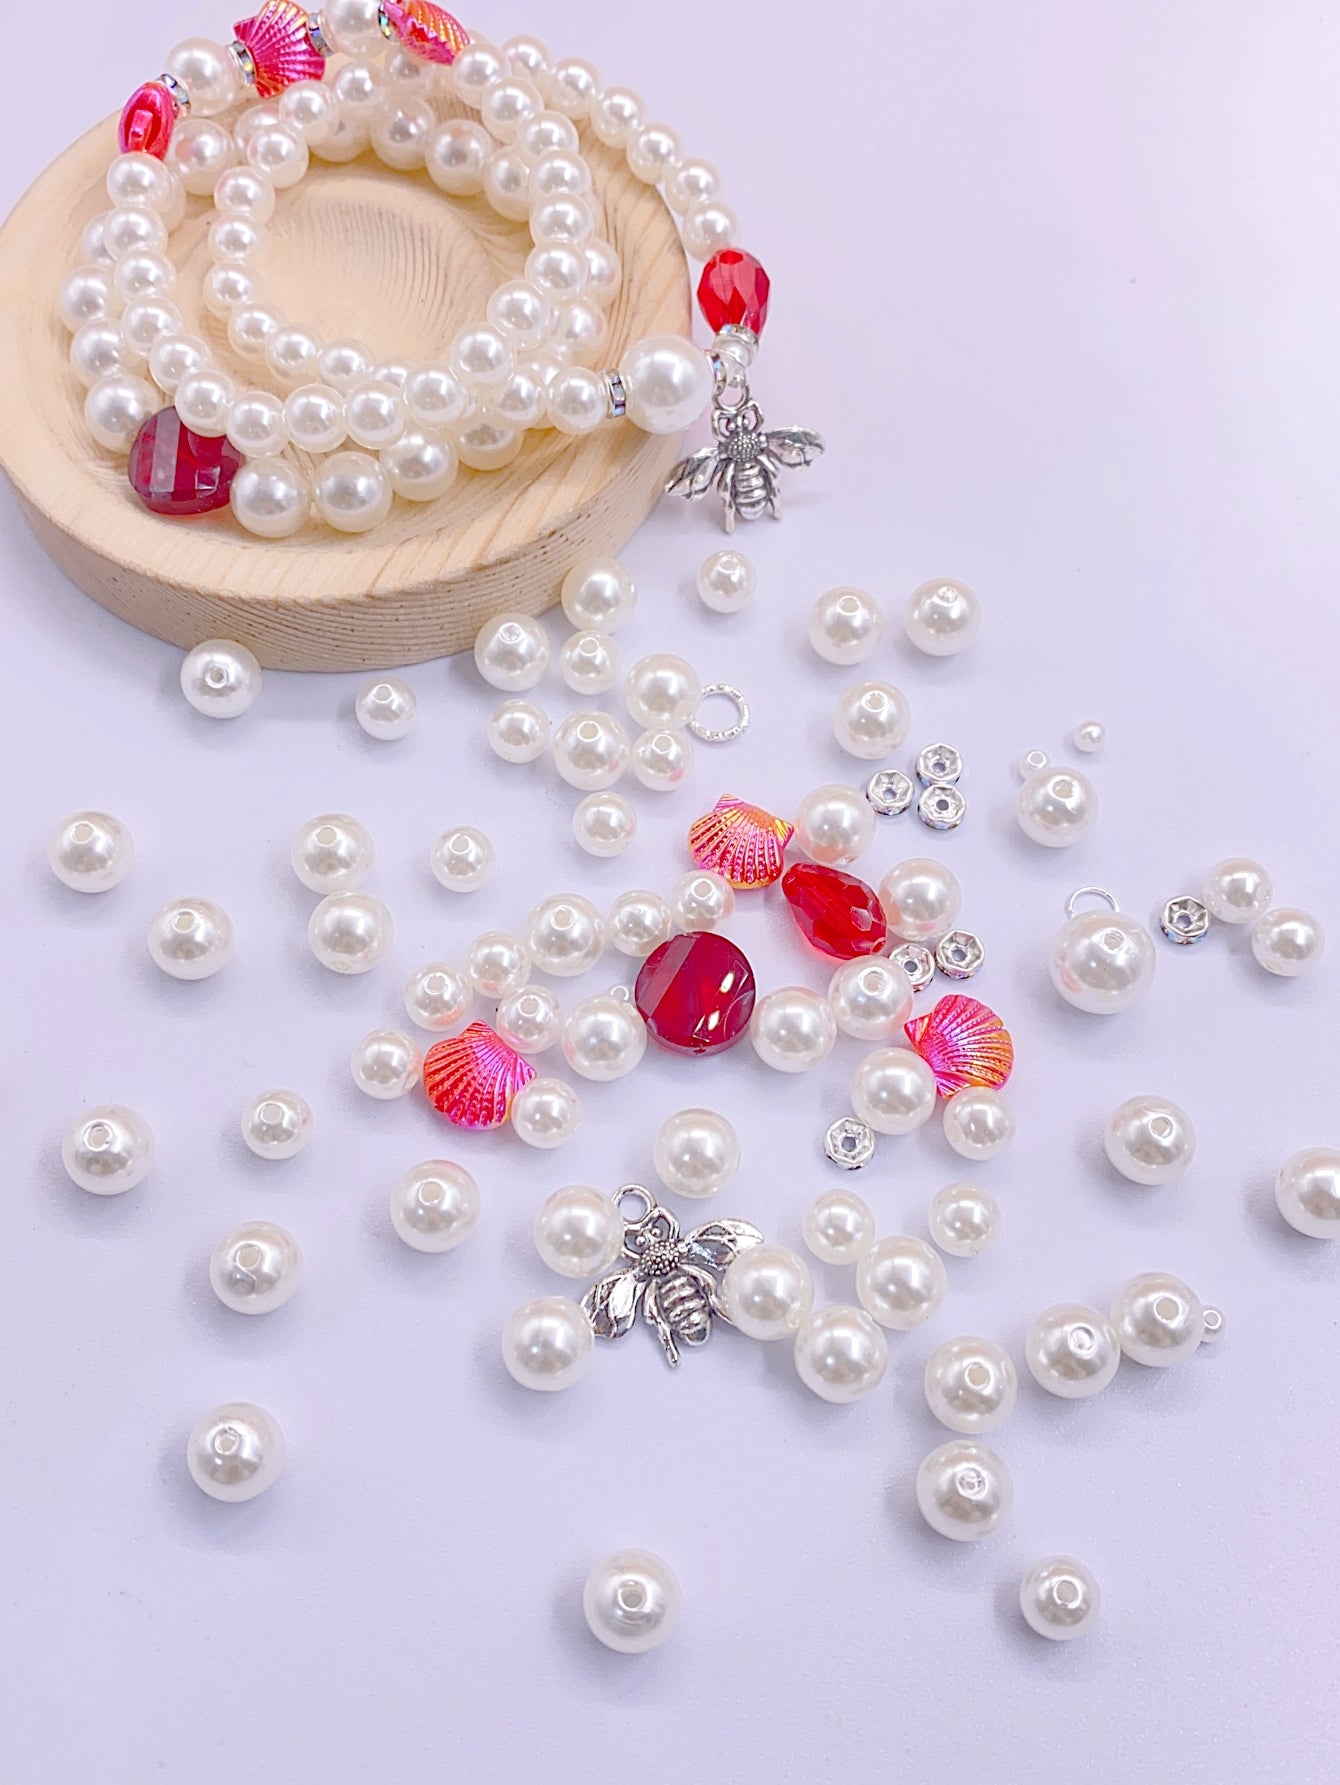 Handmade diy Material Bag abs White highlighter Straight Hole Pearl DIY bracelet Mix and match jewelry accessory beads